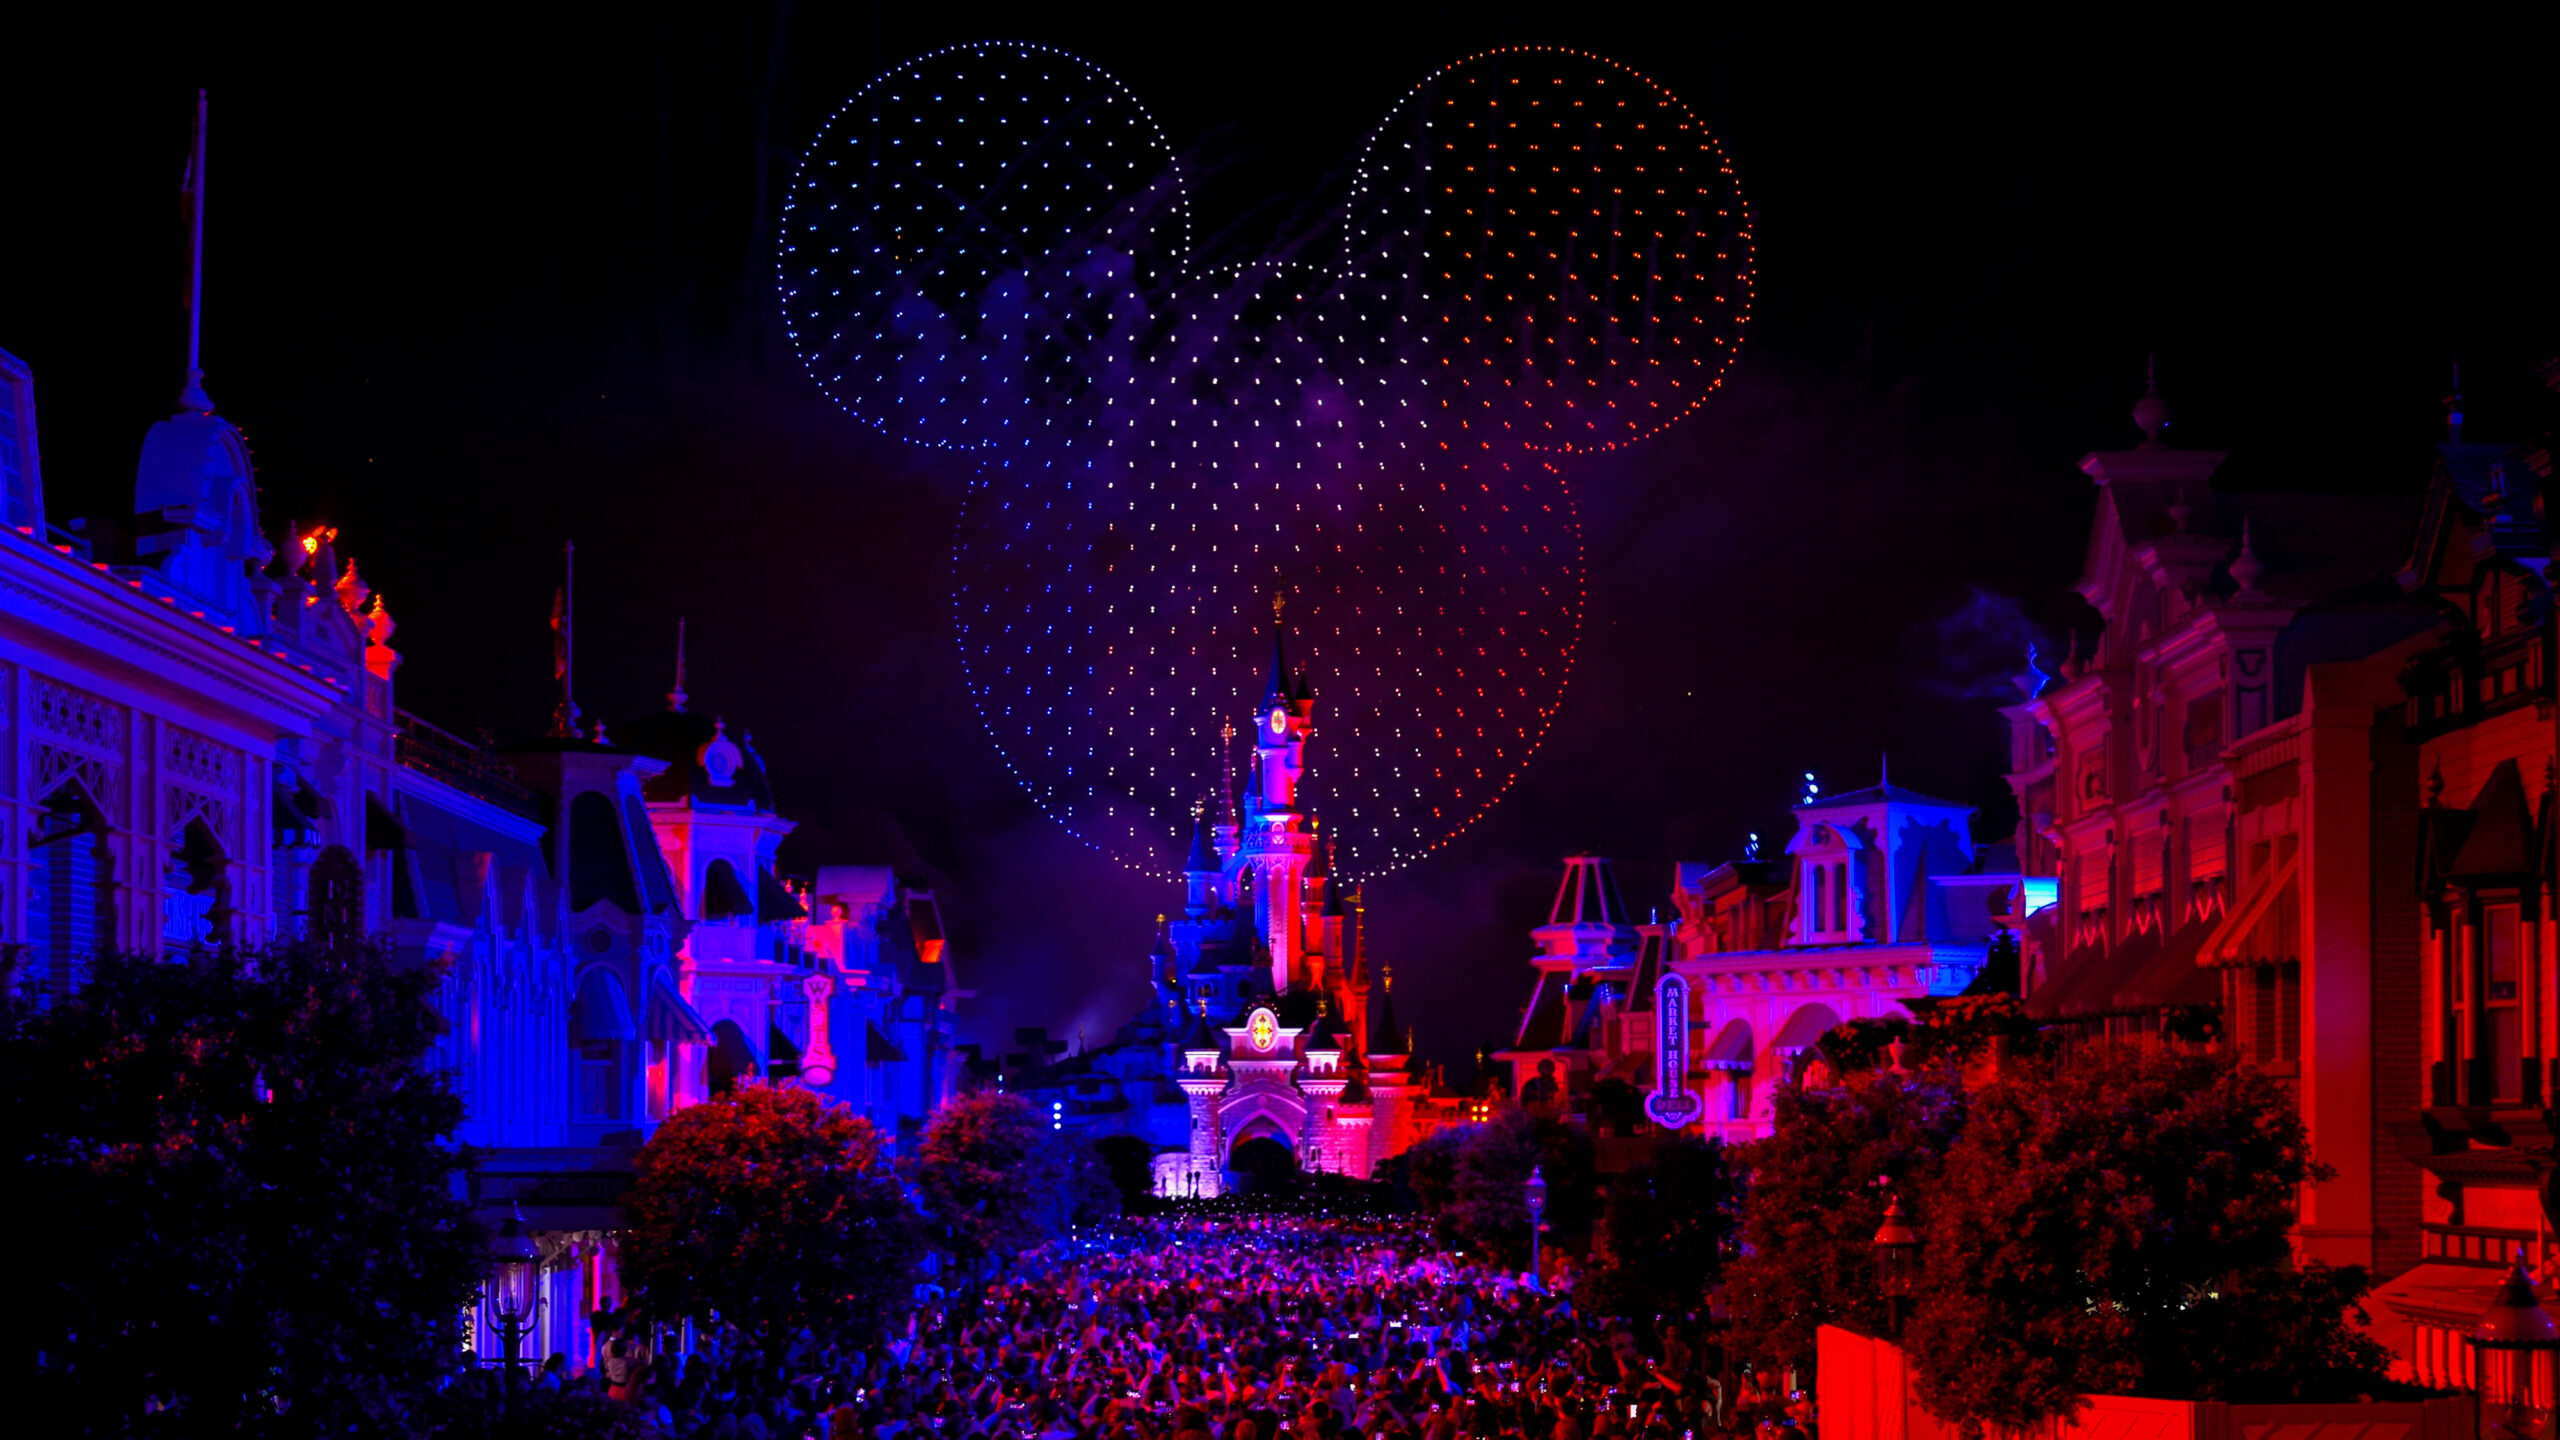 Disneyland® Paris sets GUINNESS WORLD RECORDS™ title for the “Largest aerial display of a fictional character formed by multirotors/drones” using 1,571 Drones